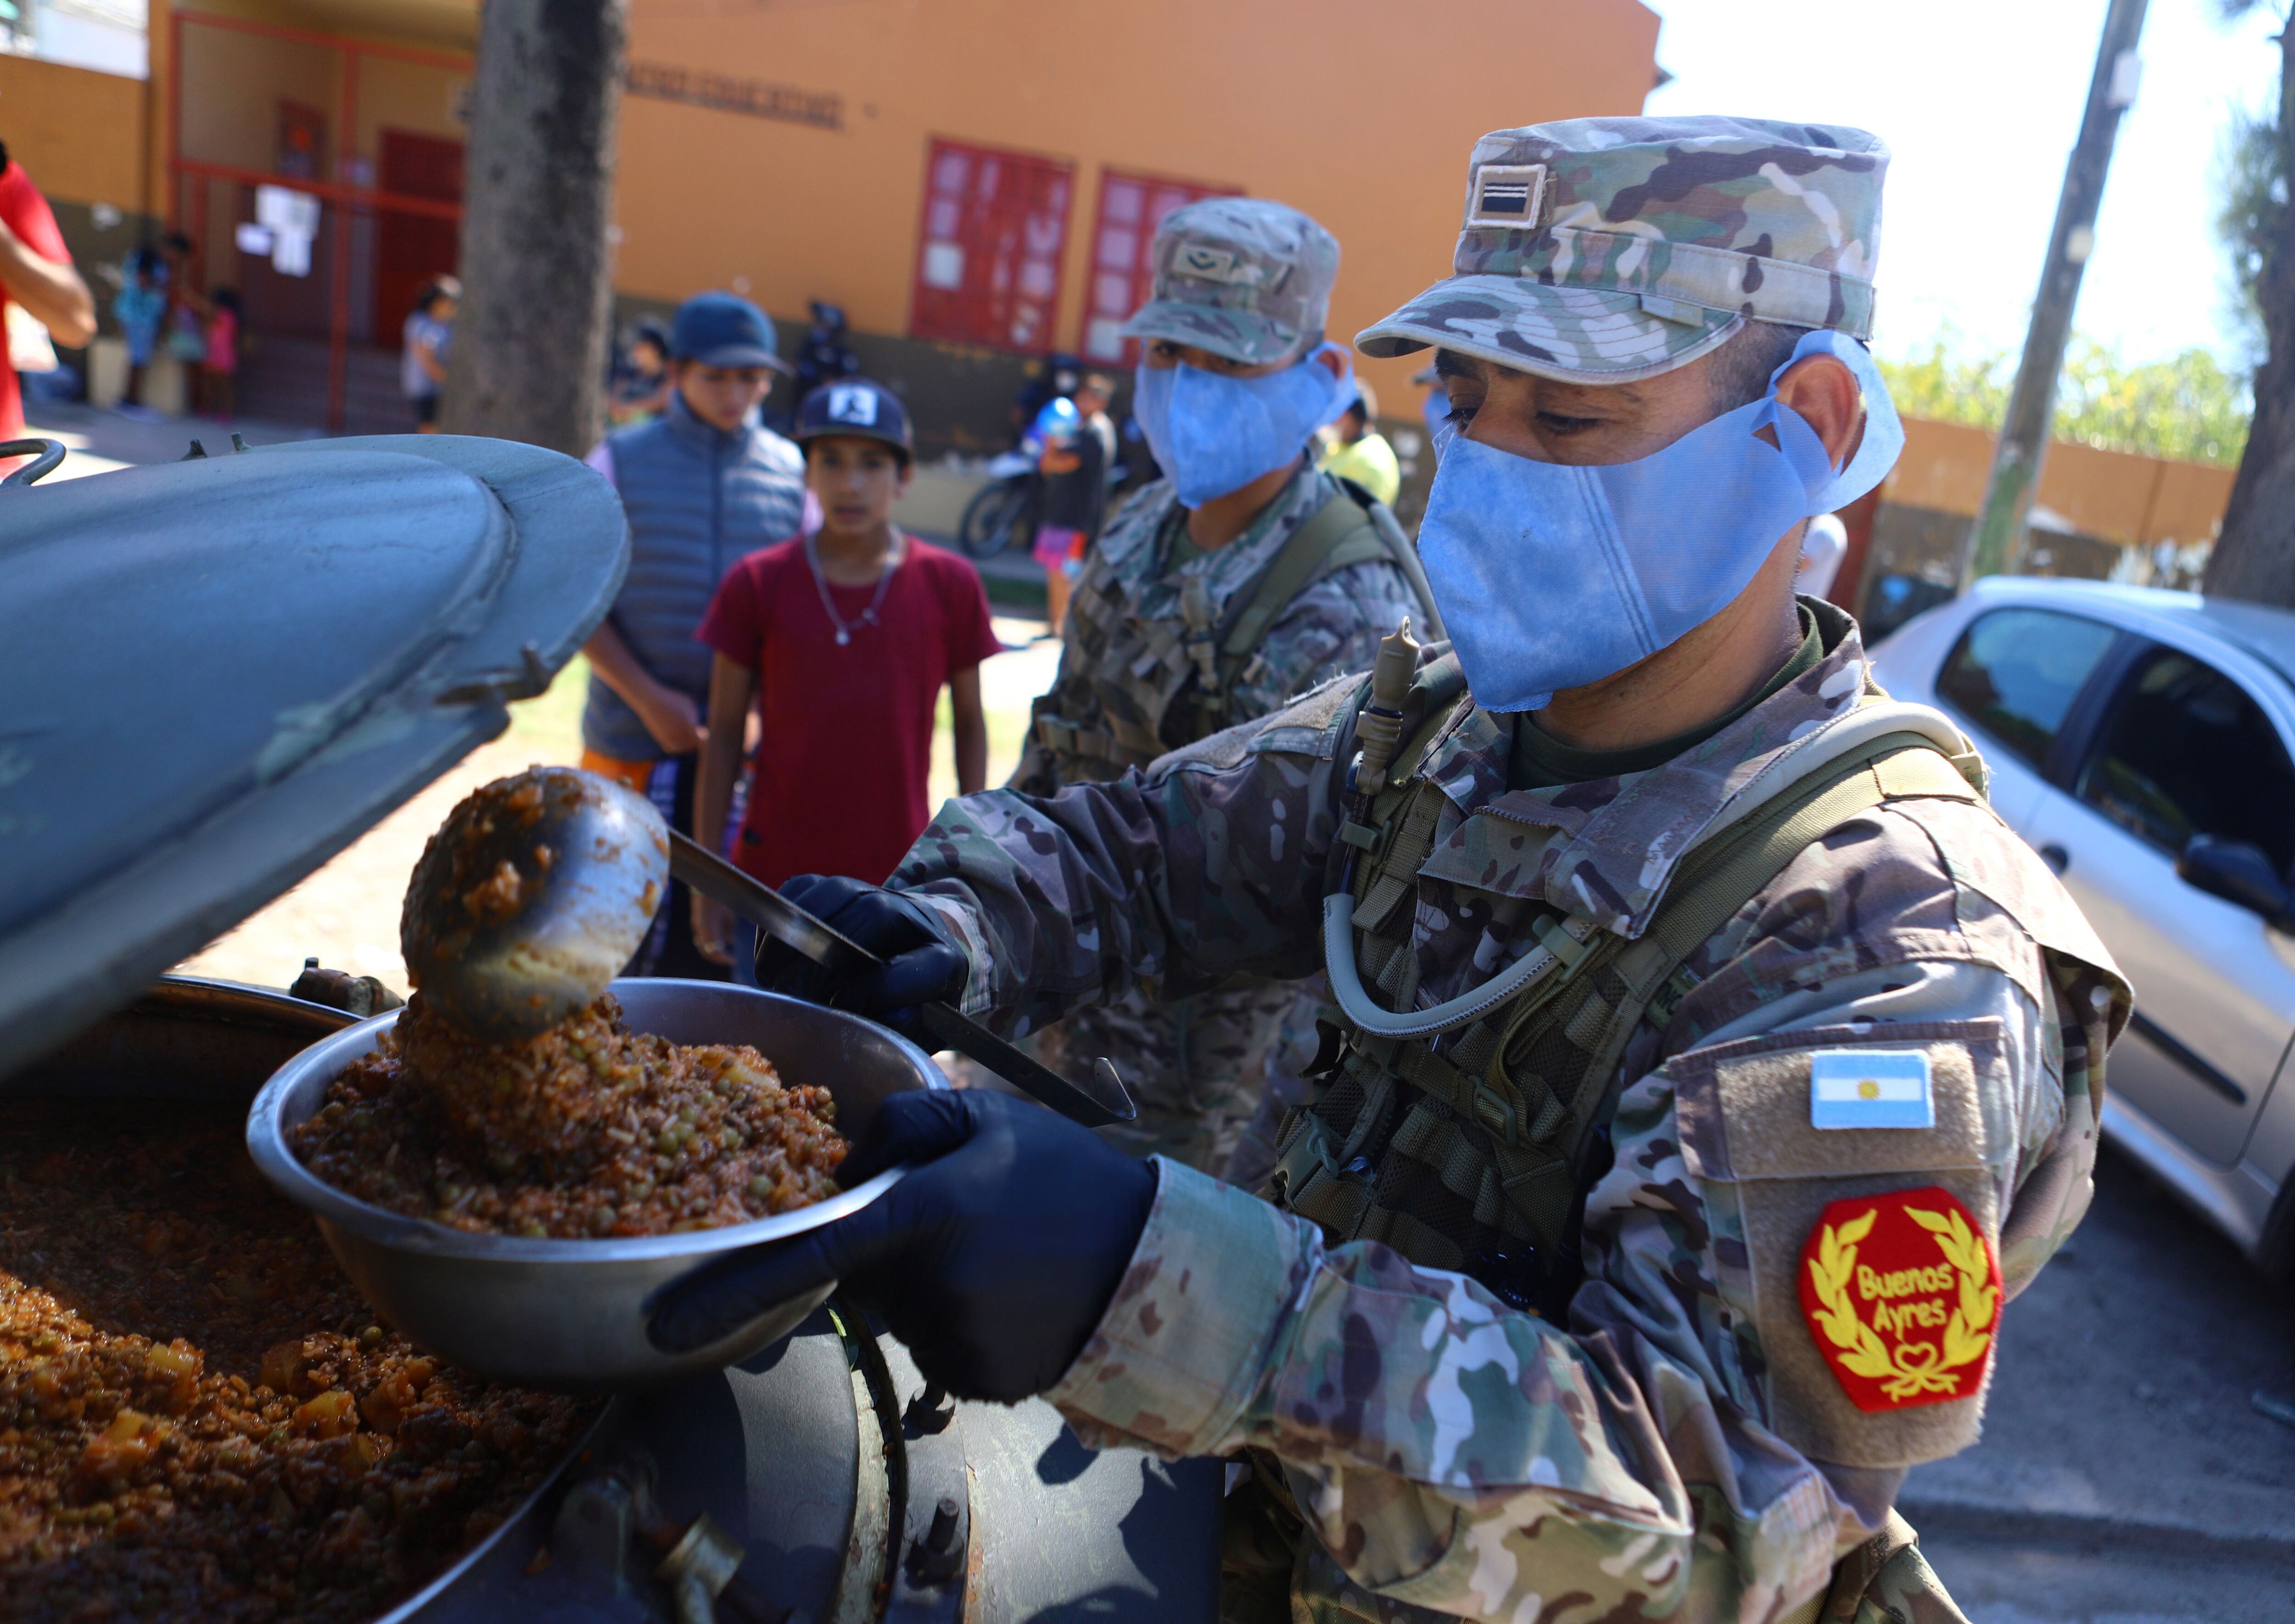 Military staff wearing protective masks serve a ration of food aid, organized by the municipality for a low-income neighborhood, during the mandatory quarantine for coronavirus disease (COVID-19), in Quilmes, on the outskirts of Buenos Aires, Argentina March 23, 2020